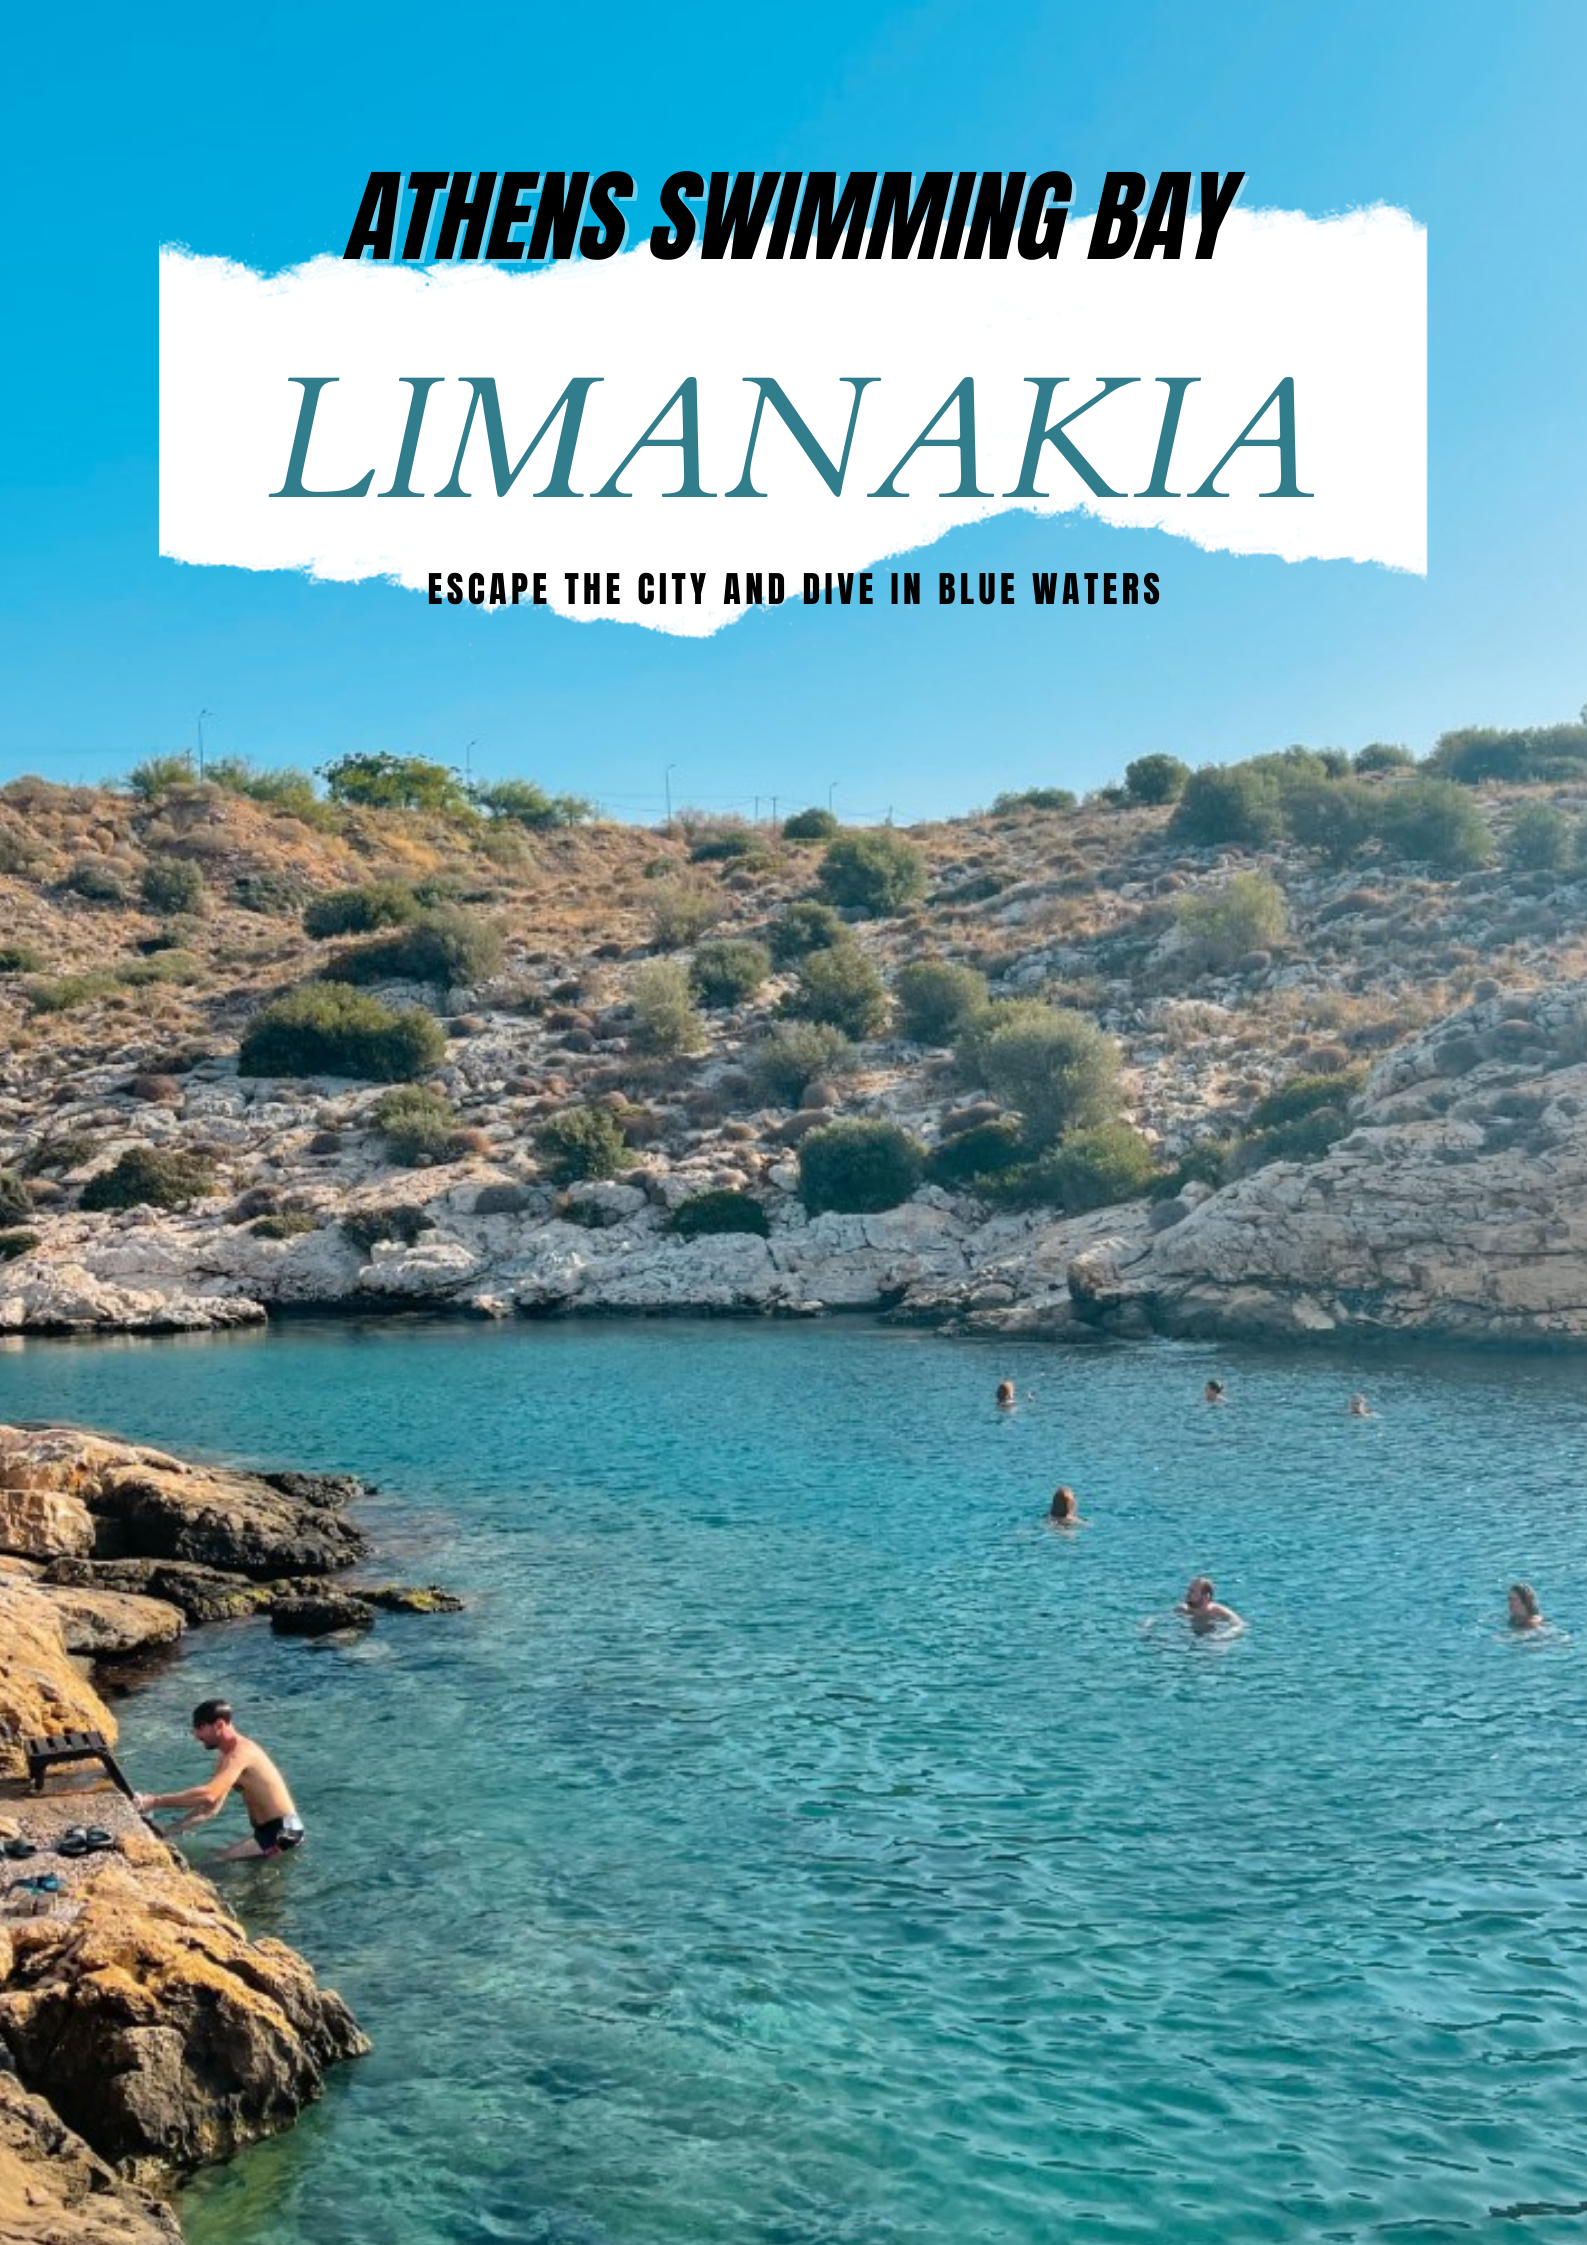 Limanakia, the beautiful blue water bay of Athens